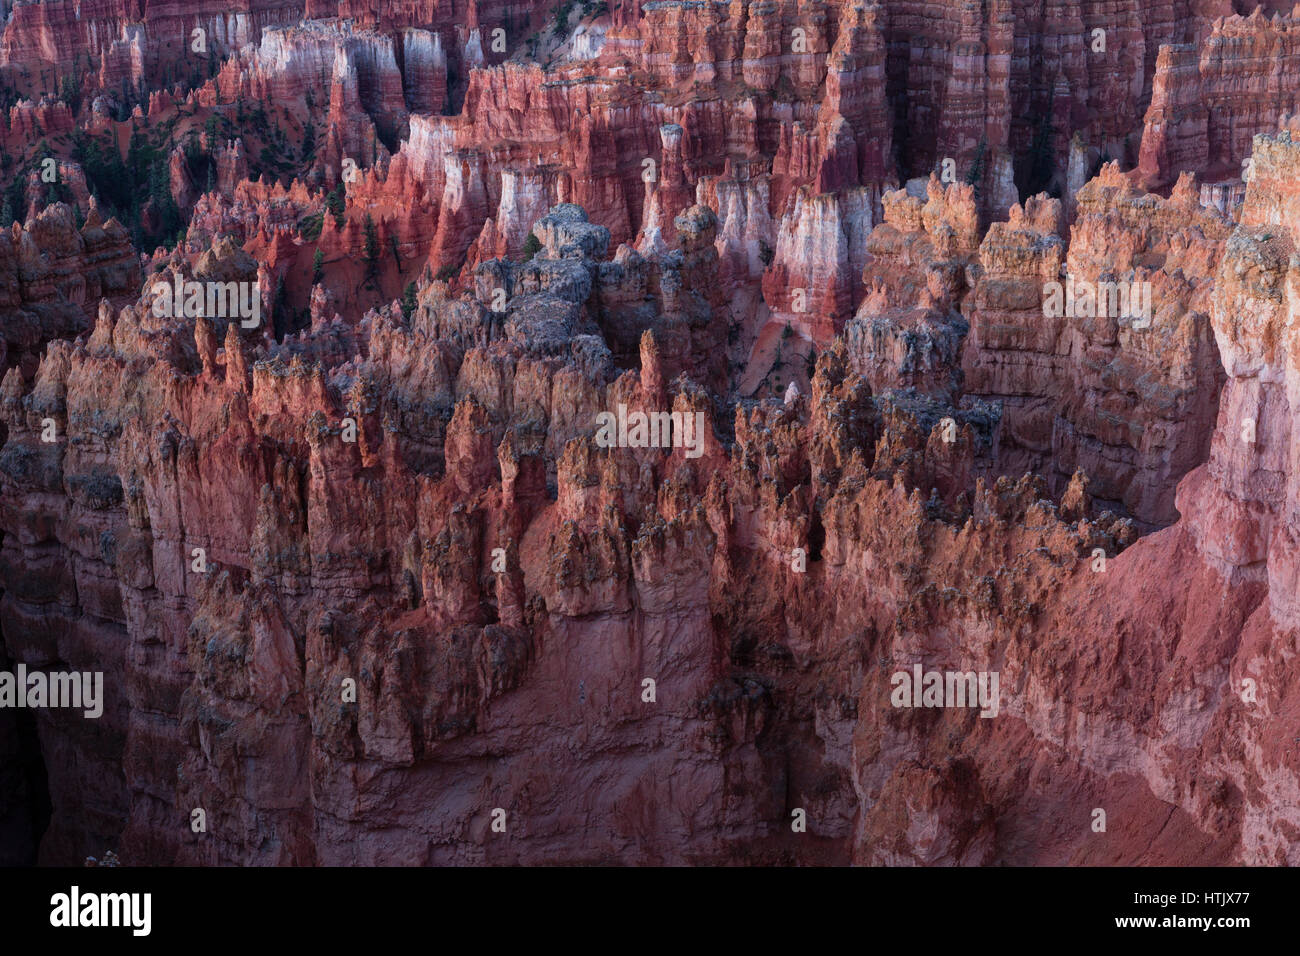 Wall Street rock formation, Bryce Canyon National Park, Utah, USA Banque D'Images